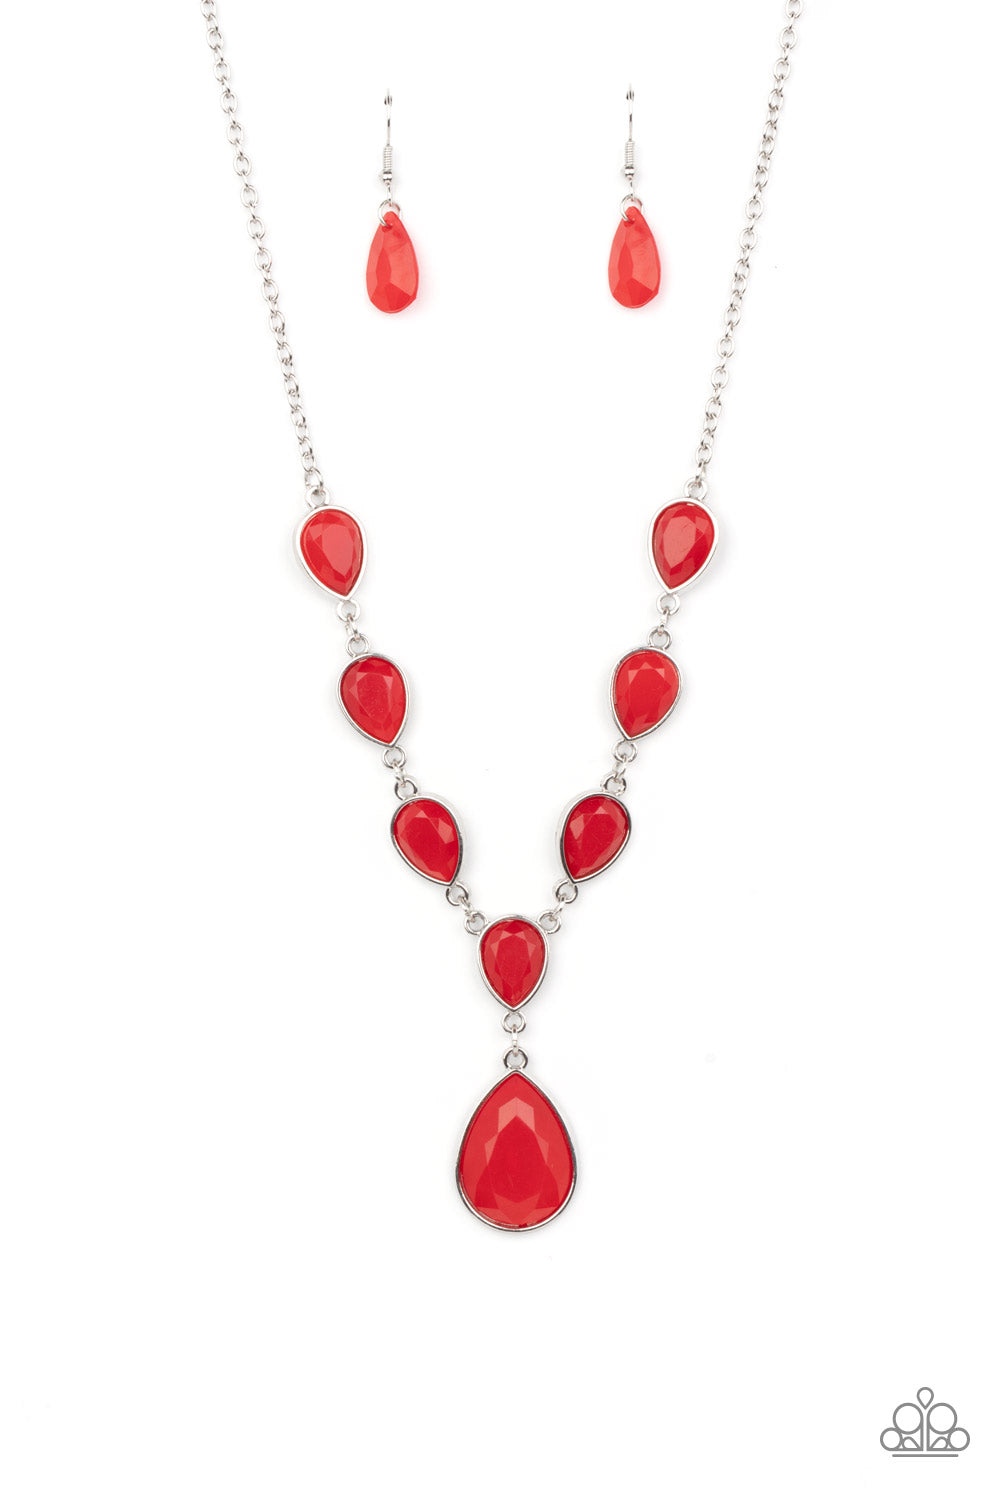 Paparazzi Party Paradise - Red Necklace - A Finishing Touch Jewelry